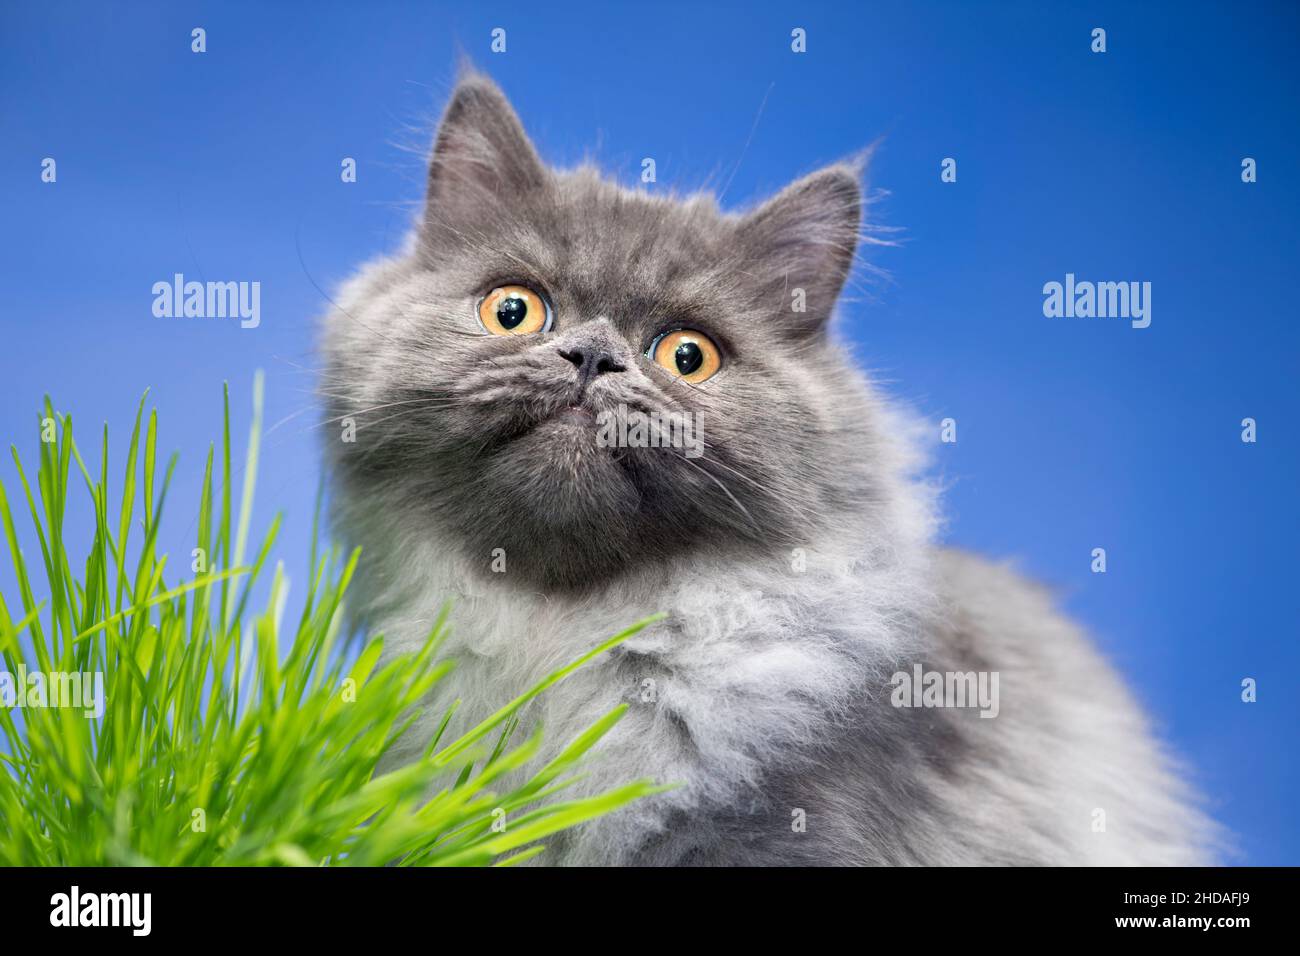 Sweet looking grey cat looking at the camera. Stock Photo